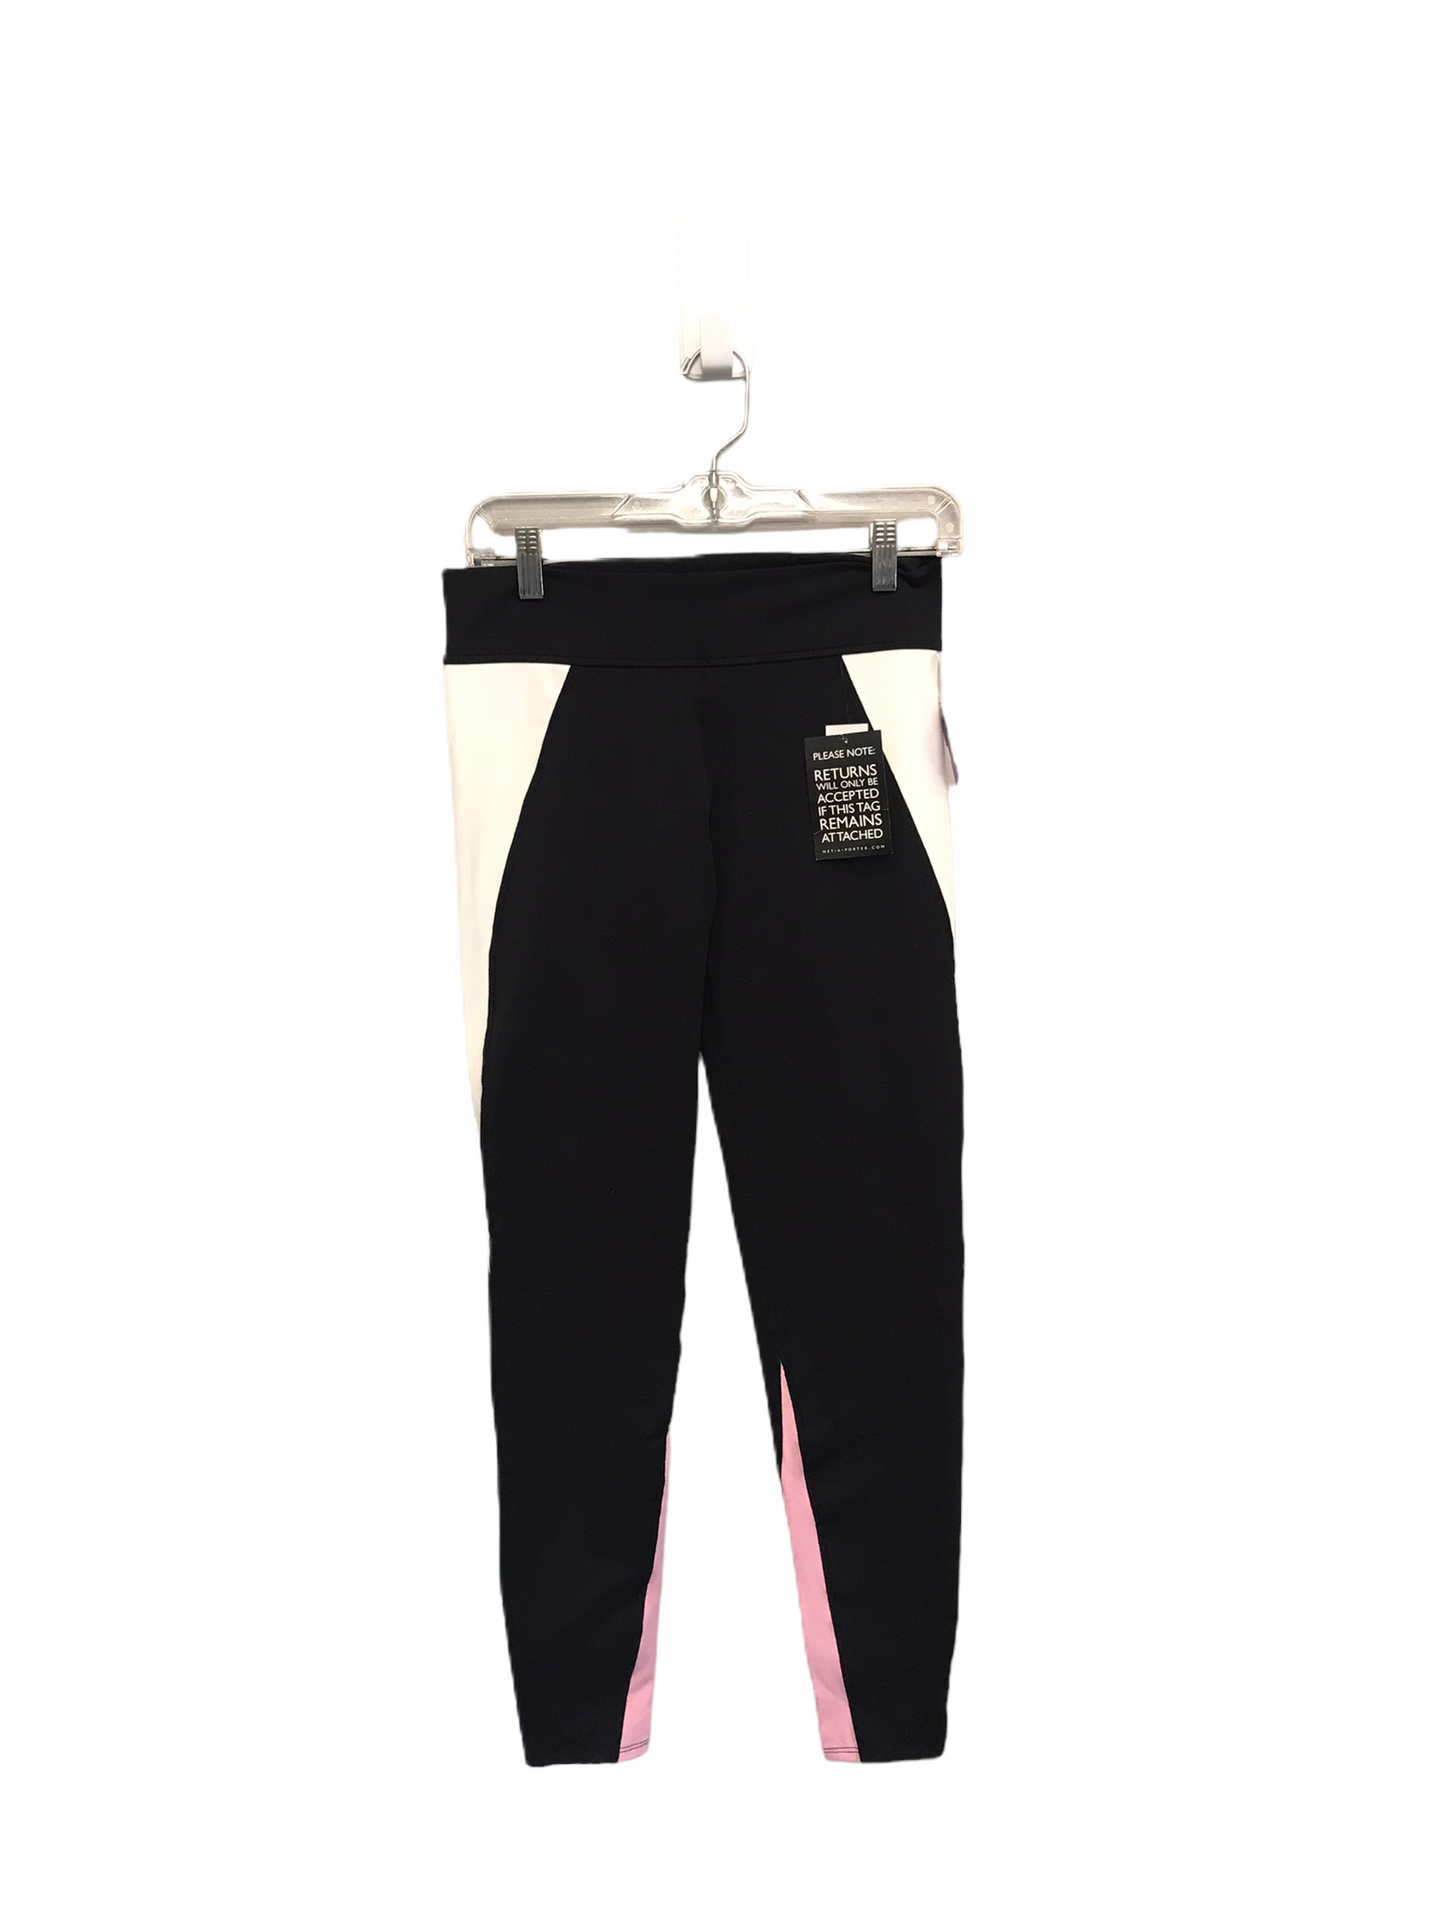 Athletic Leggings By Live The Process  Size: L